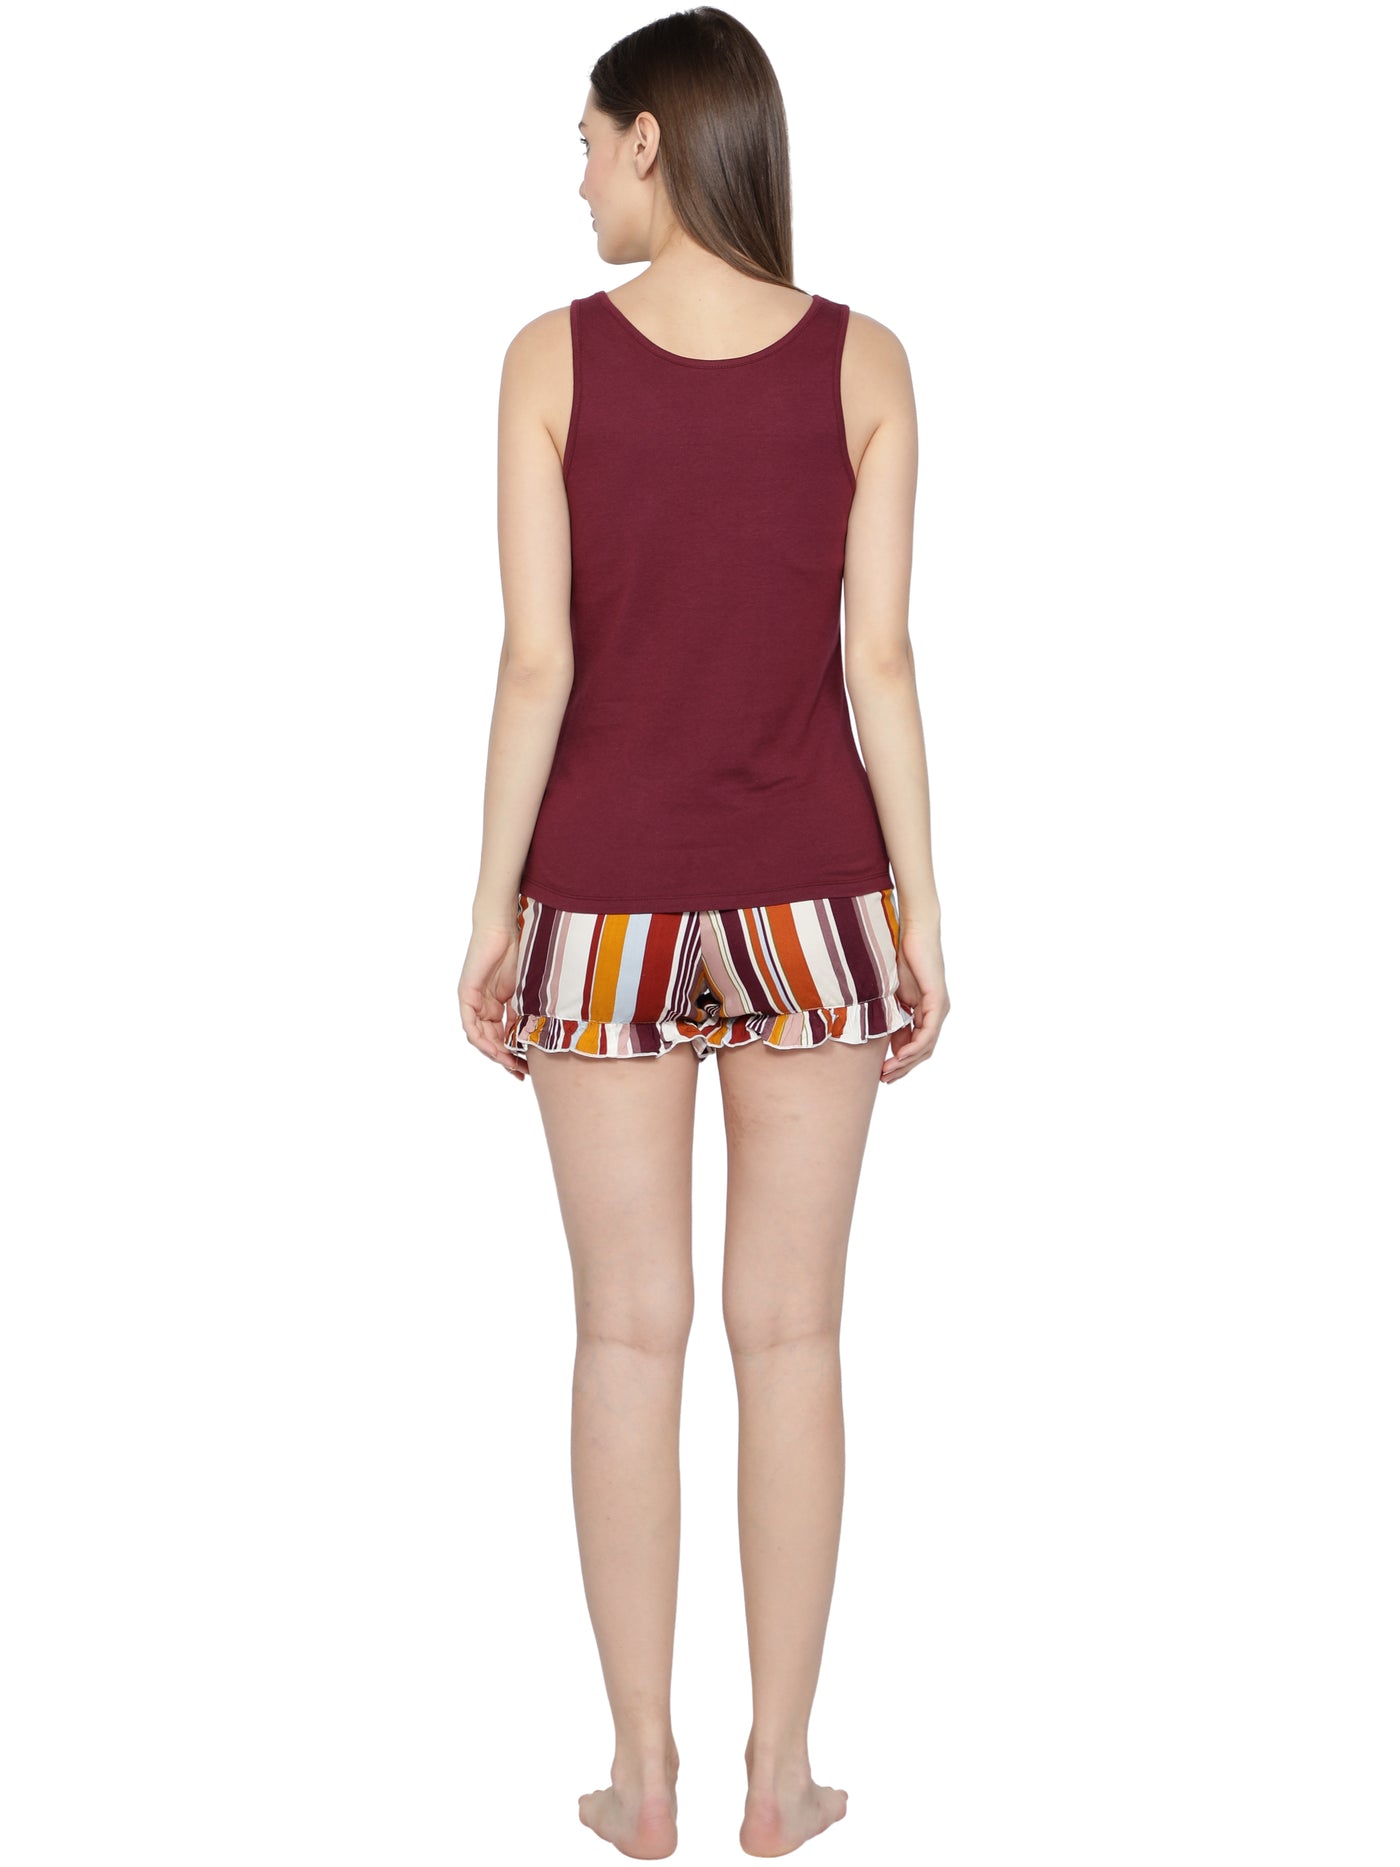 Night Suit Shorty Set for Women-Maroon Stripes